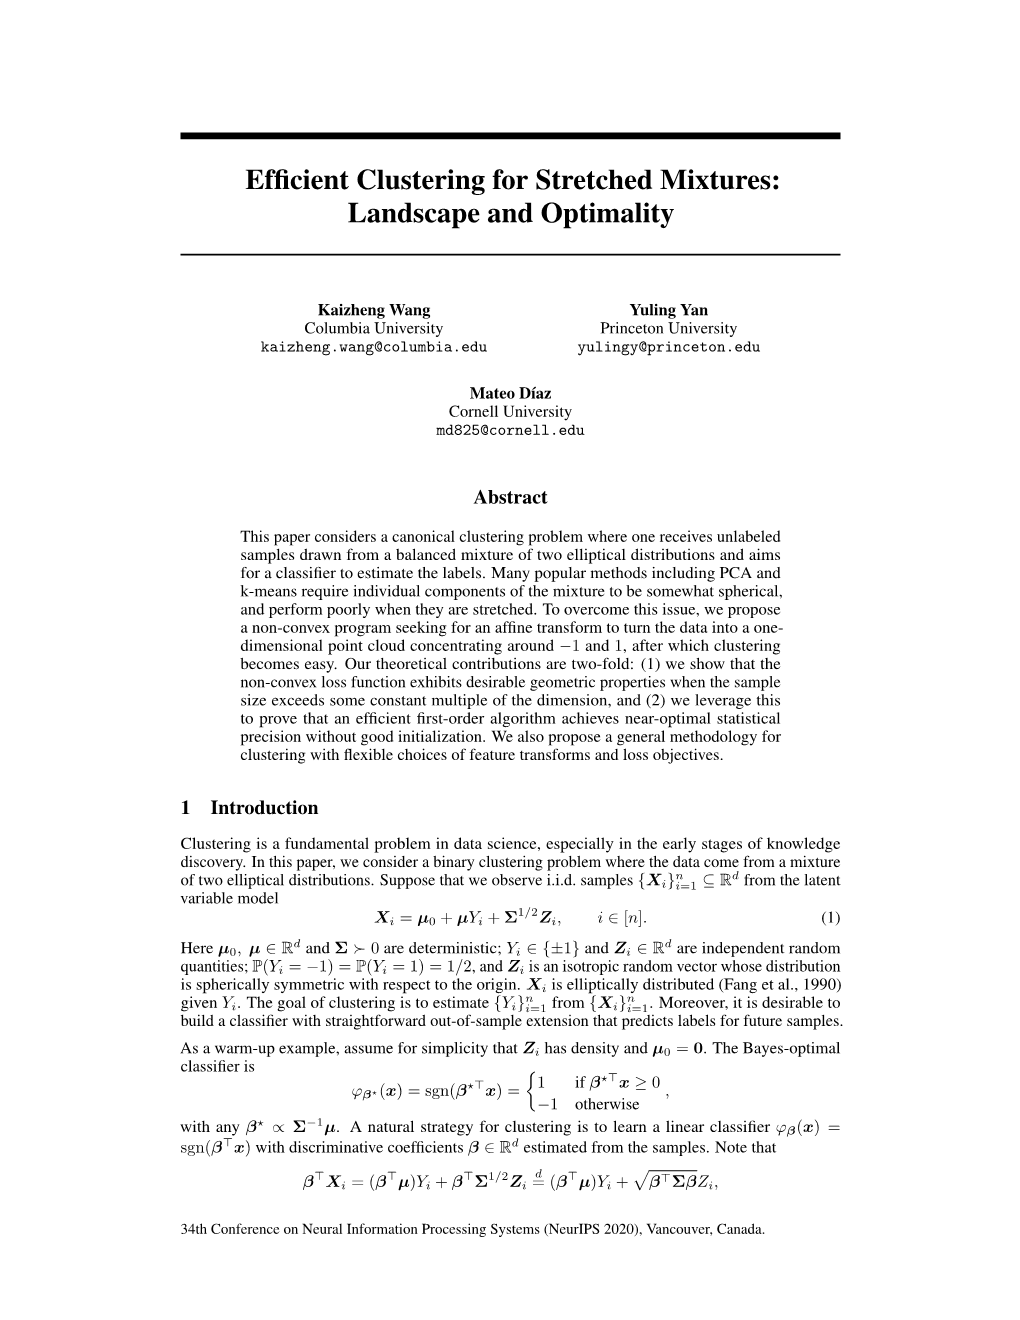 Efficient Clustering for Stretched Mixtures: Landscape and Optimality